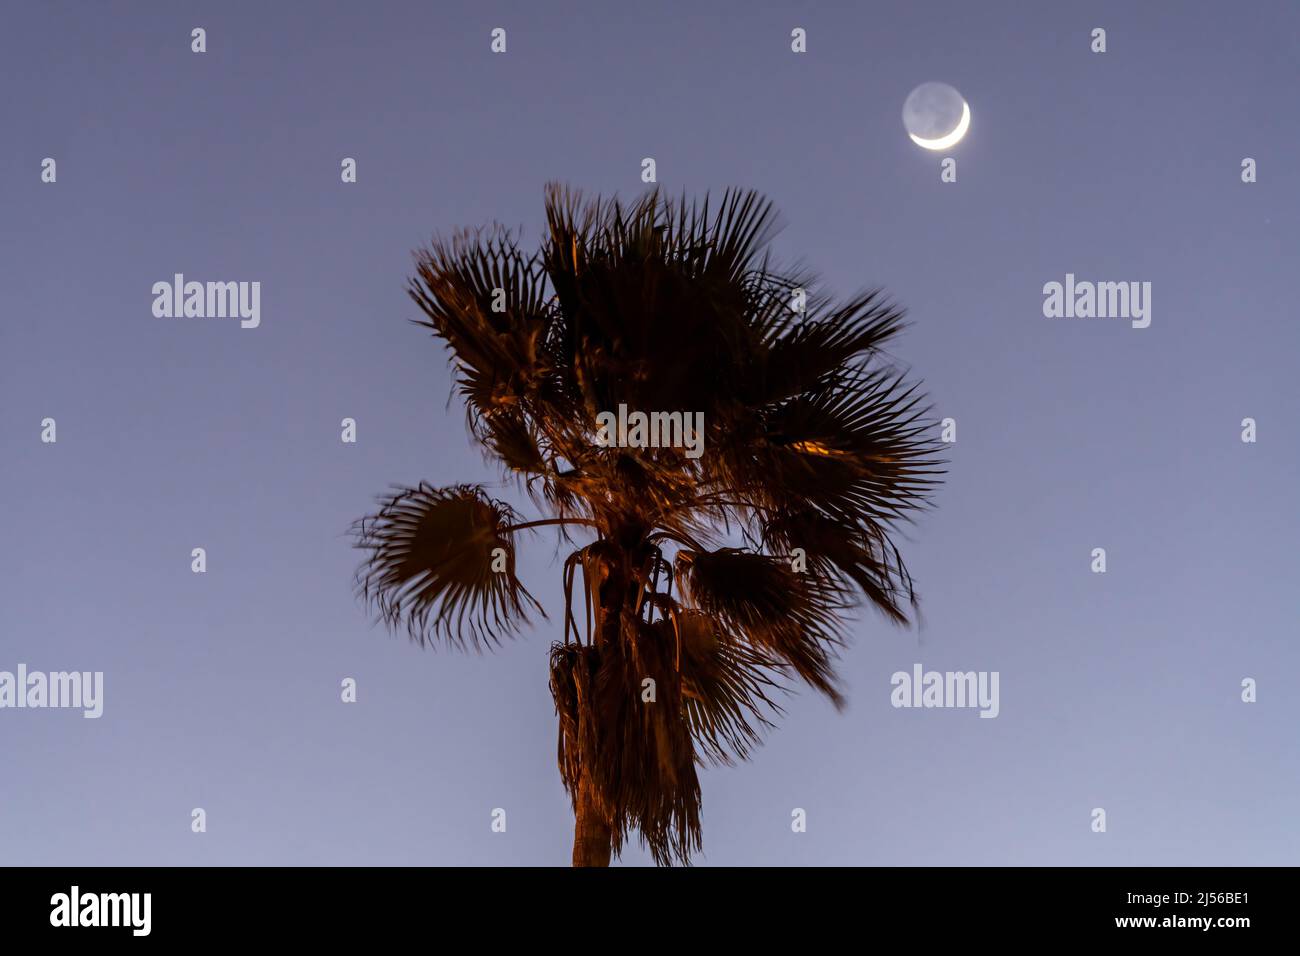 The crescent moon over a fan palm tree in evening twilight on South Padre Island, Texas. Stock Photo